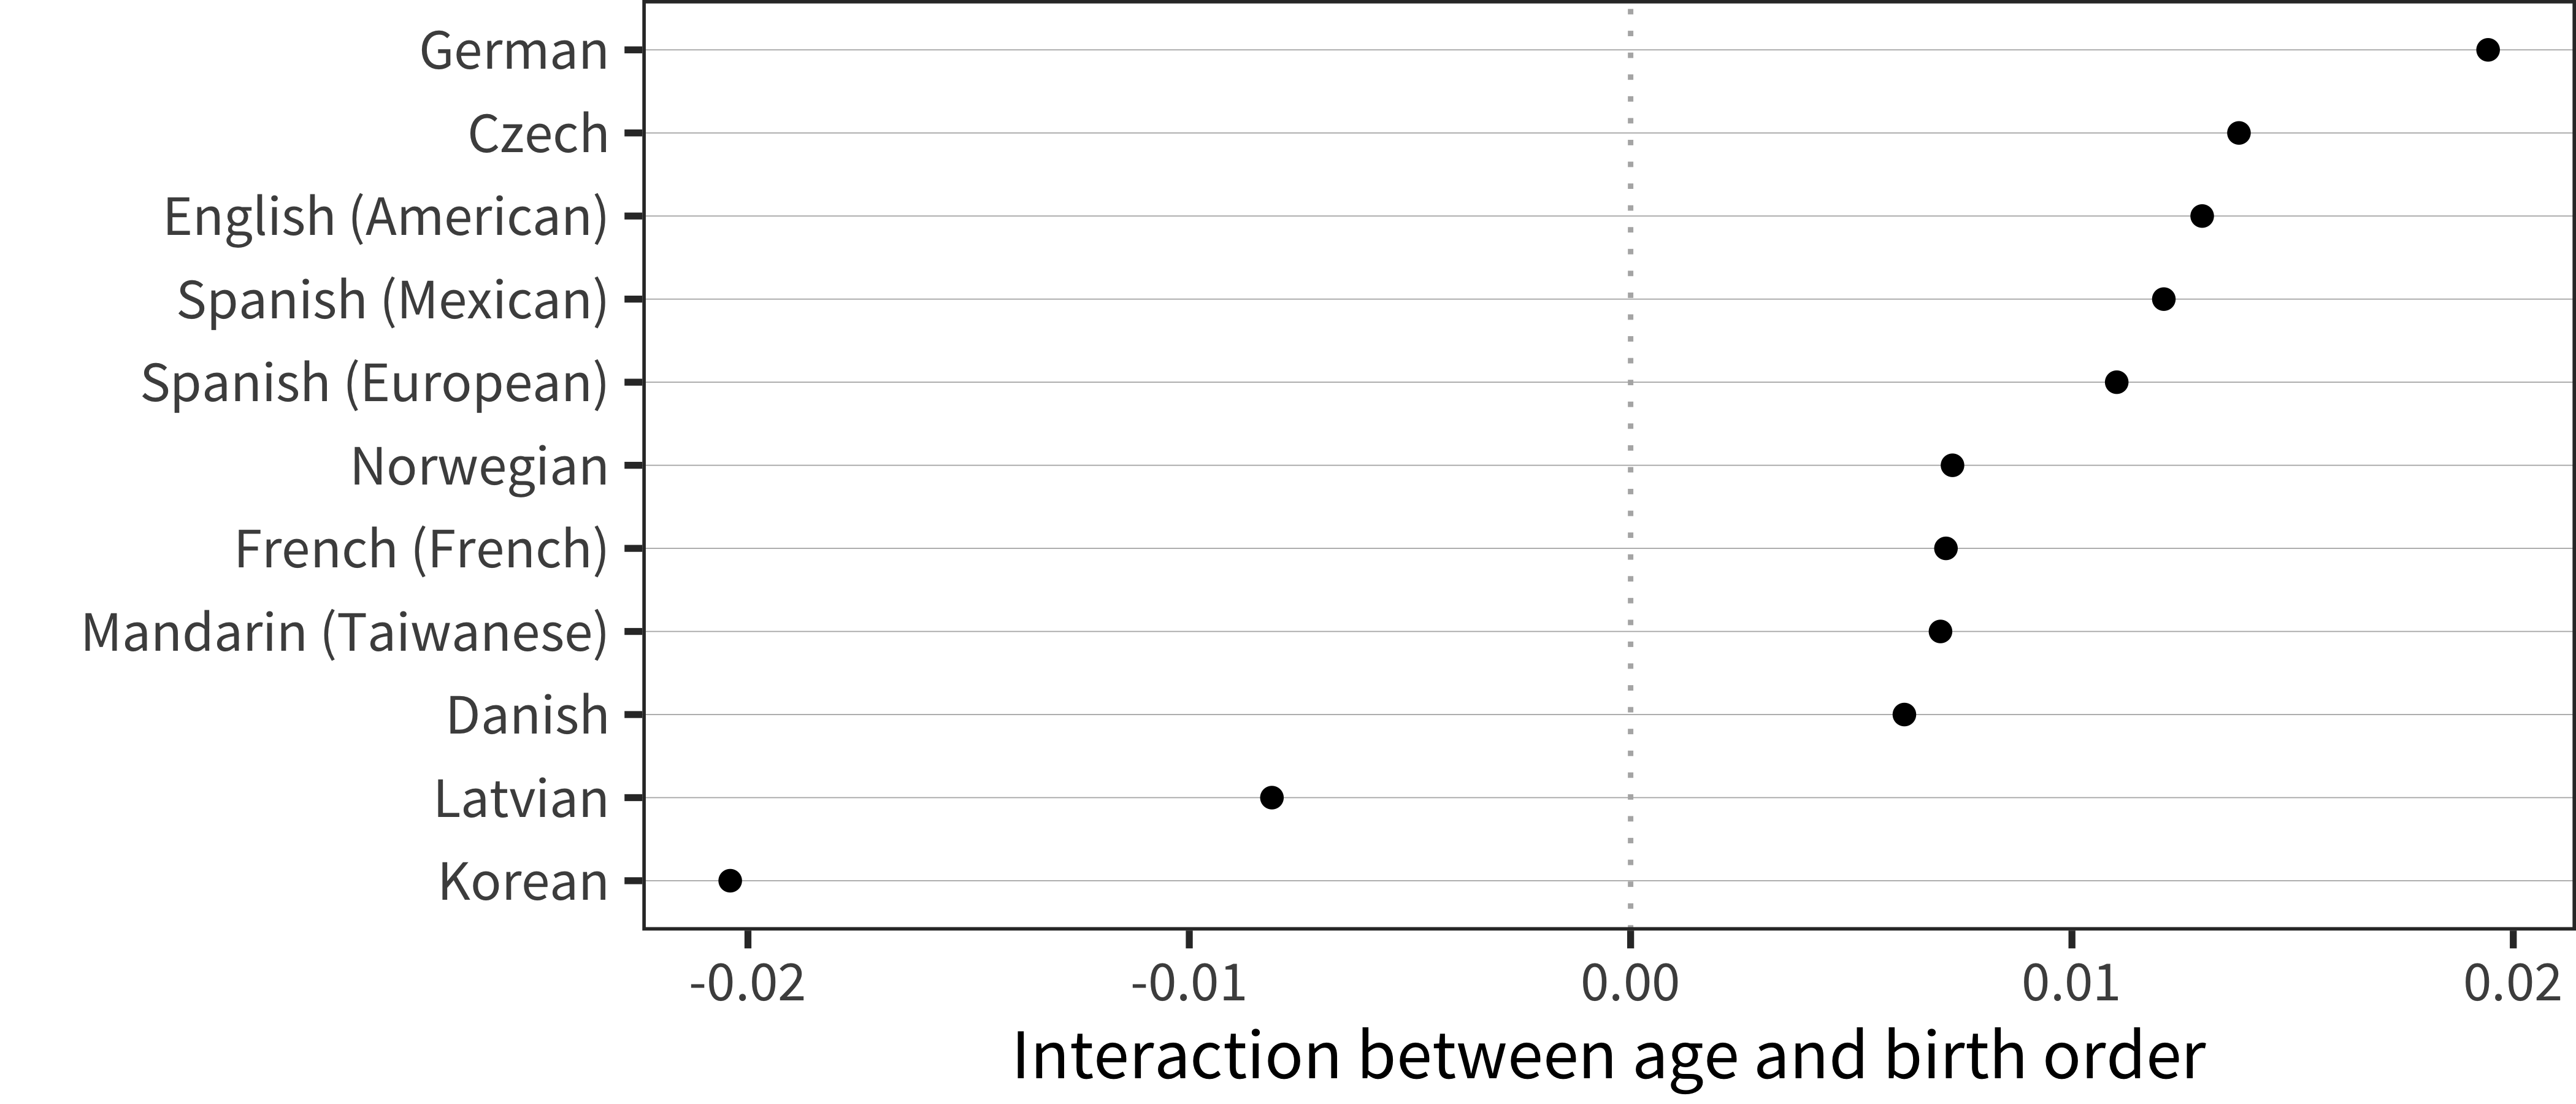 Interaction term between age and birth order for WS production data in each language.